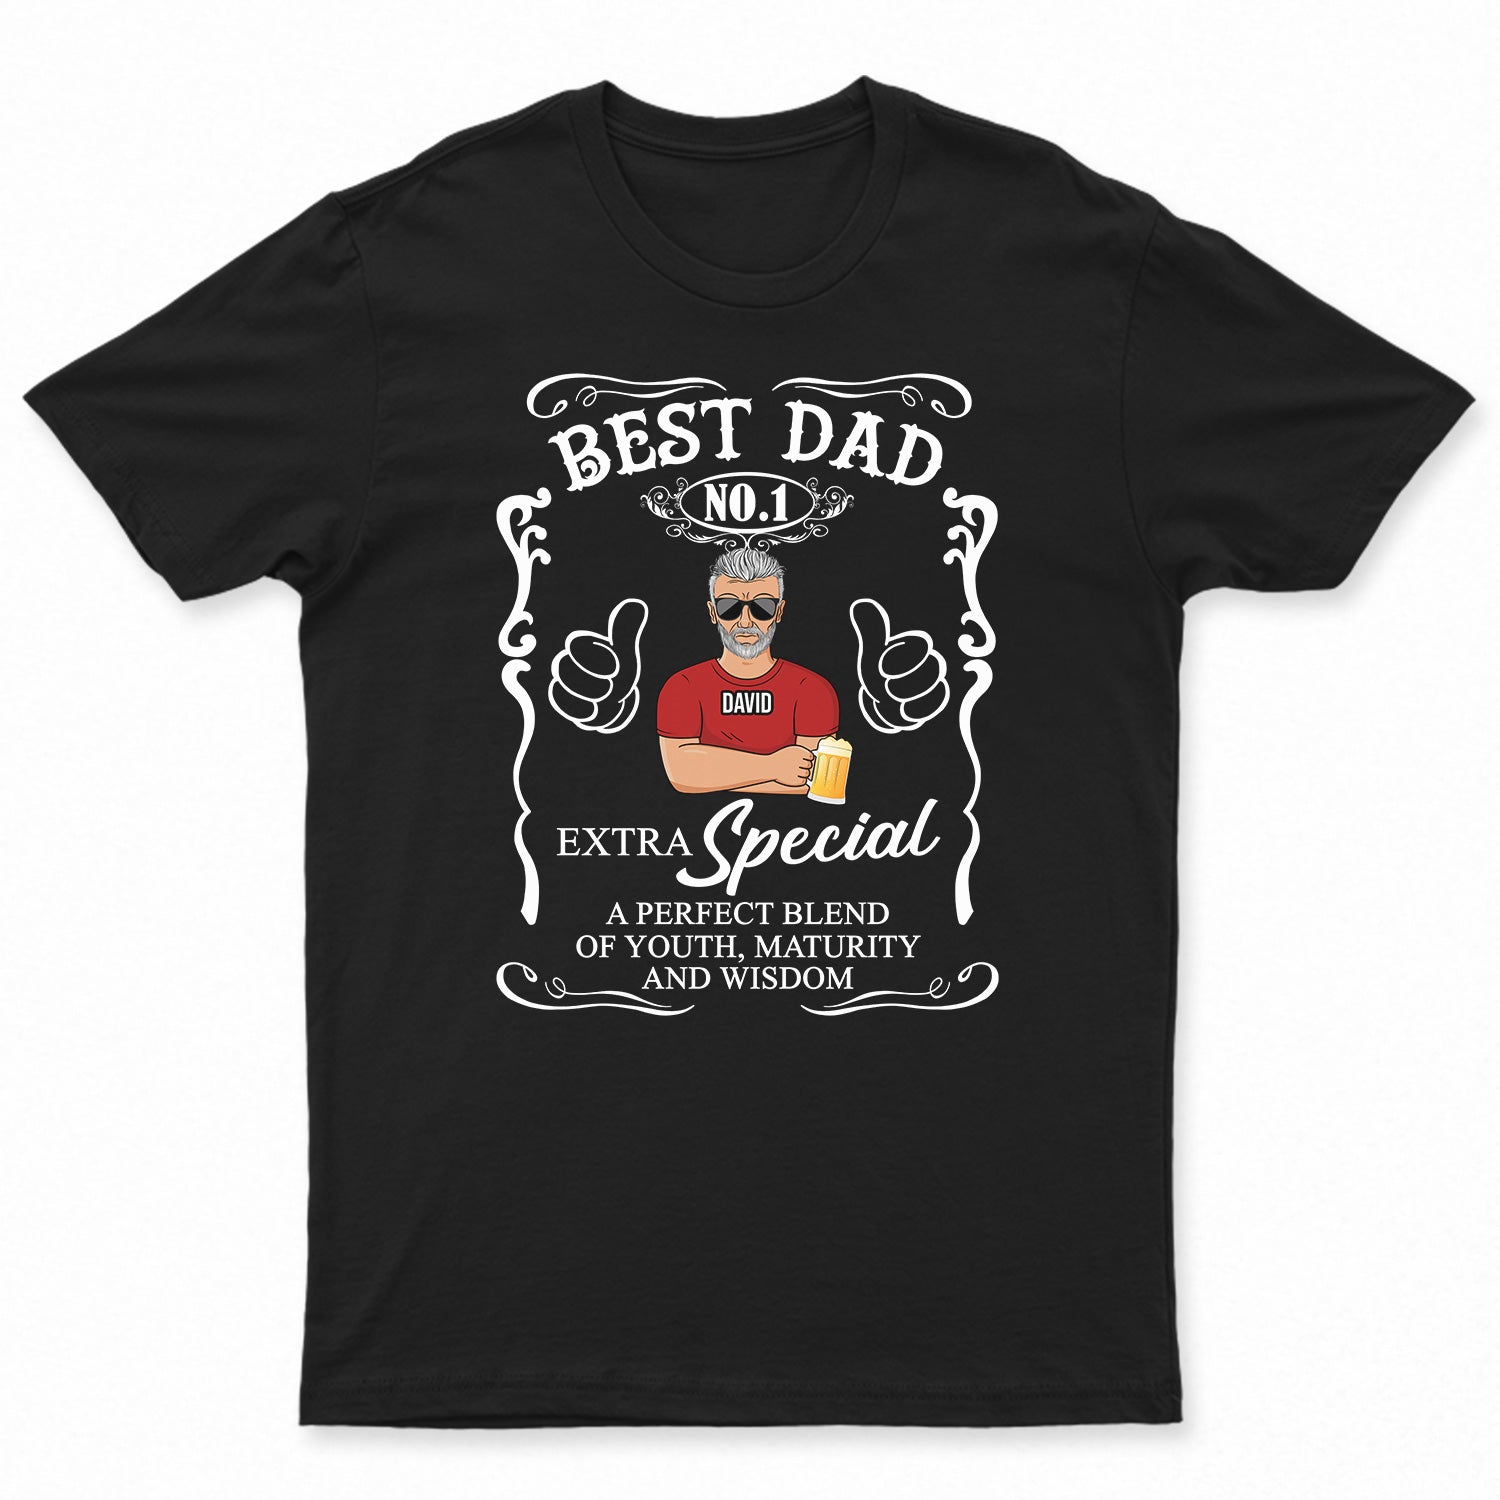 Best Dad No.1 Extra Special - Birthday, Loving Gift For Daddy, Father, Grandpa, Grandfather, Husband, Men - Personalized T Shirt